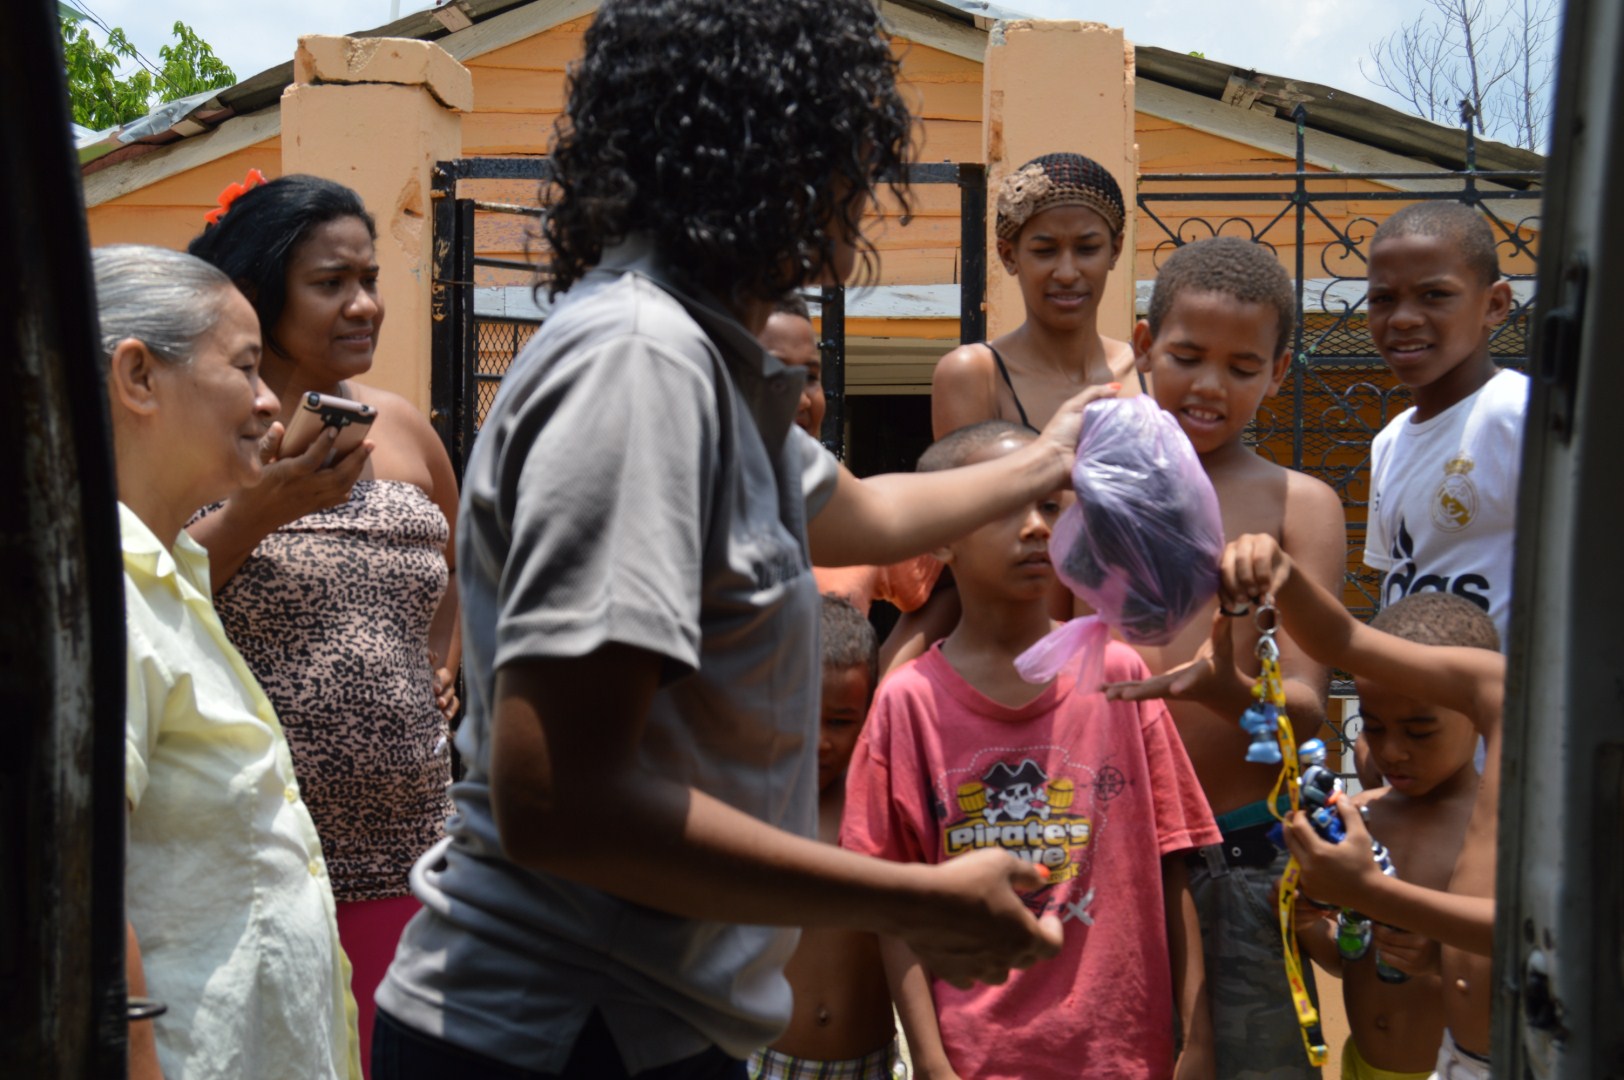 Staff giving out a plastic bag to a child; women and other children watching